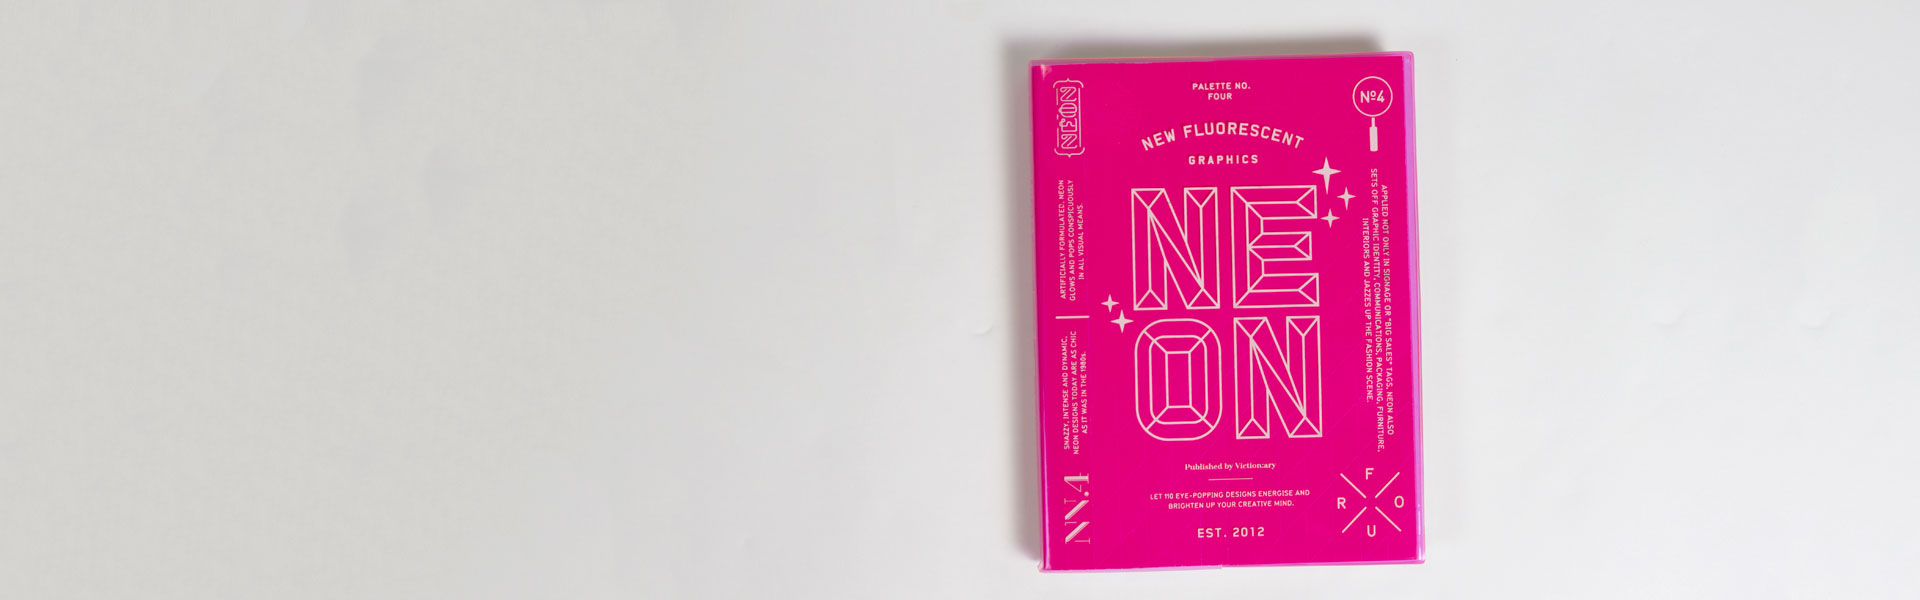 Thumbnail for: Shillington Book Club: New Fluorescent Graphics by Viction:ary